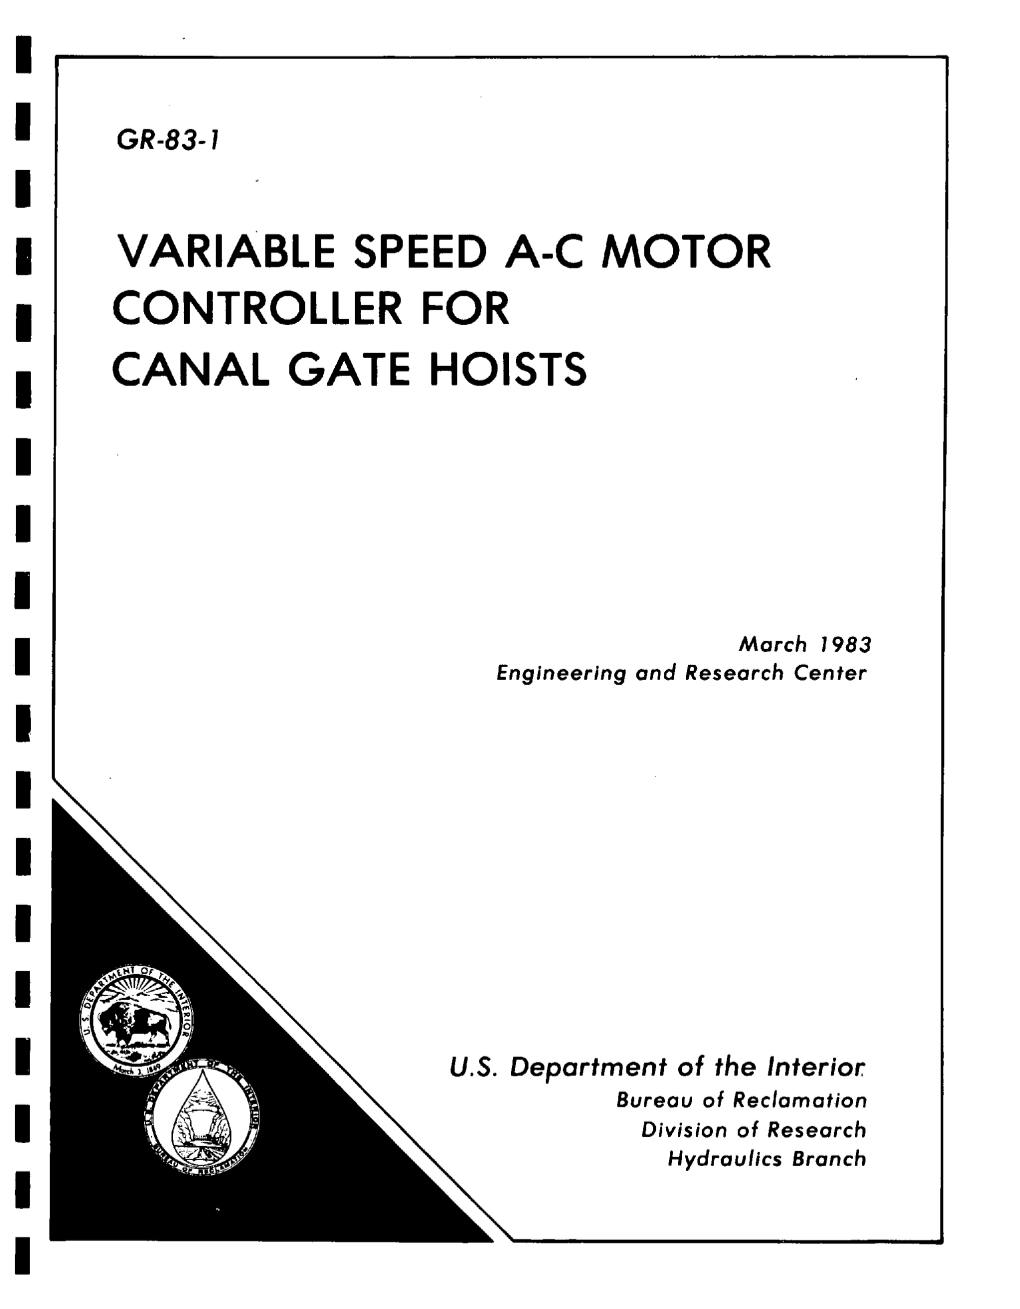 Variable Speed A-C Motor Controller for Canal Gate Hoists